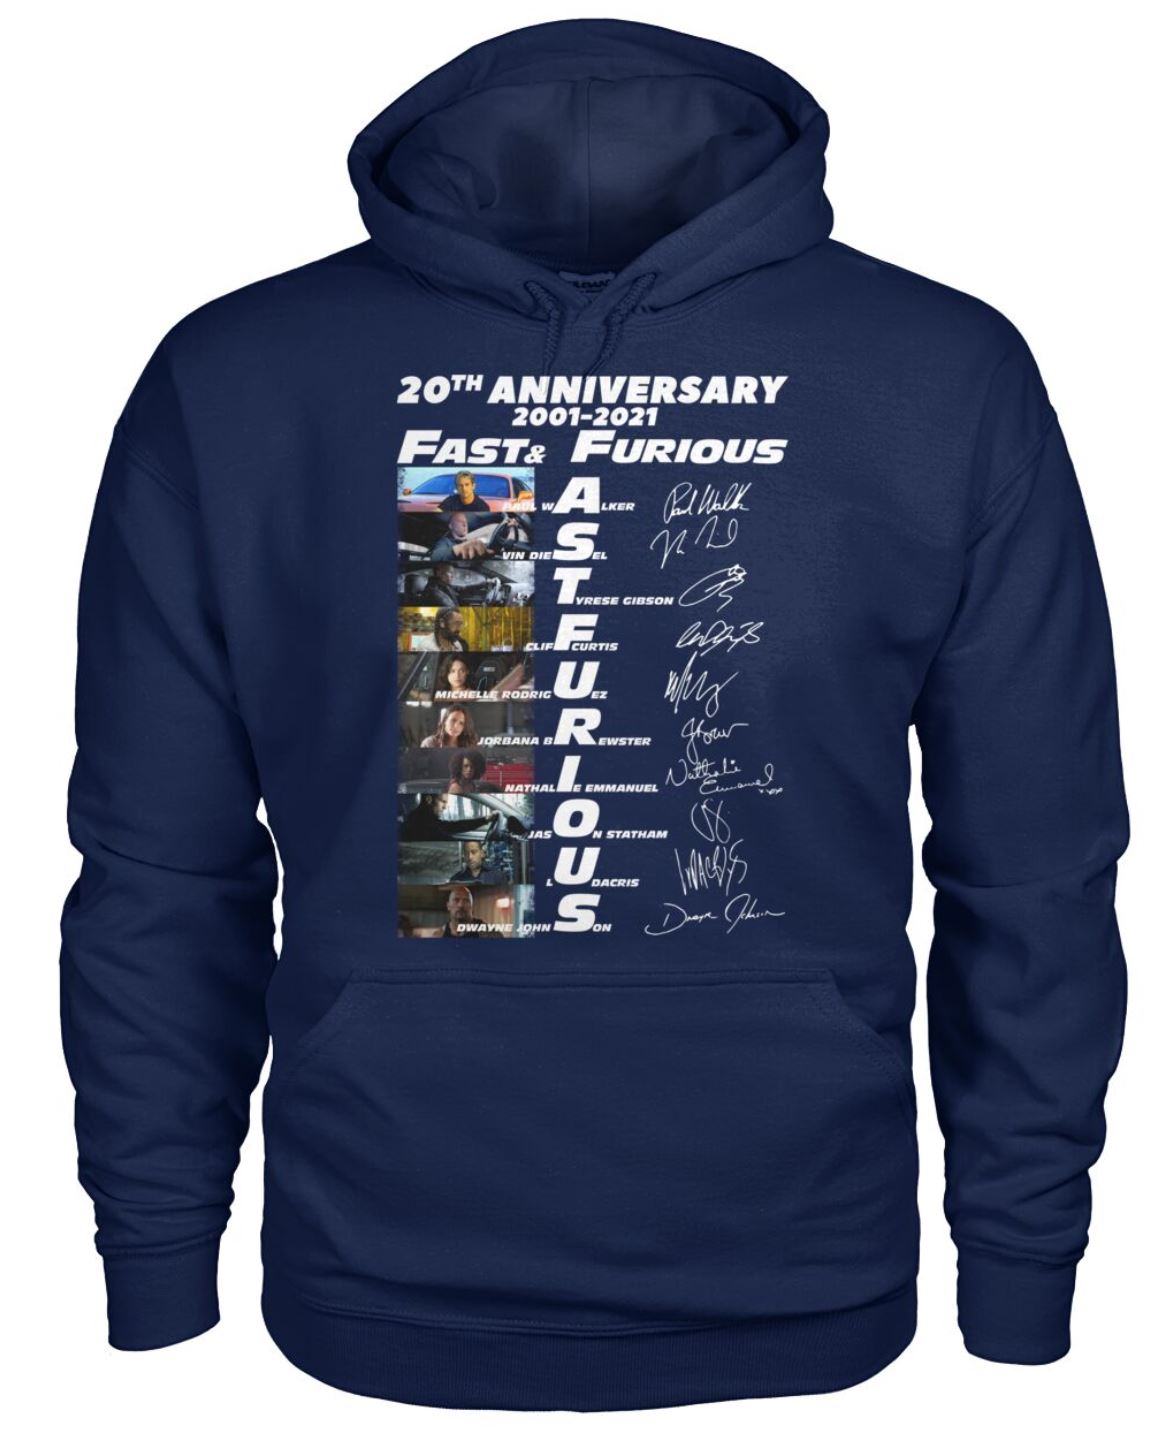 20th anniversary fast and furious hoodie